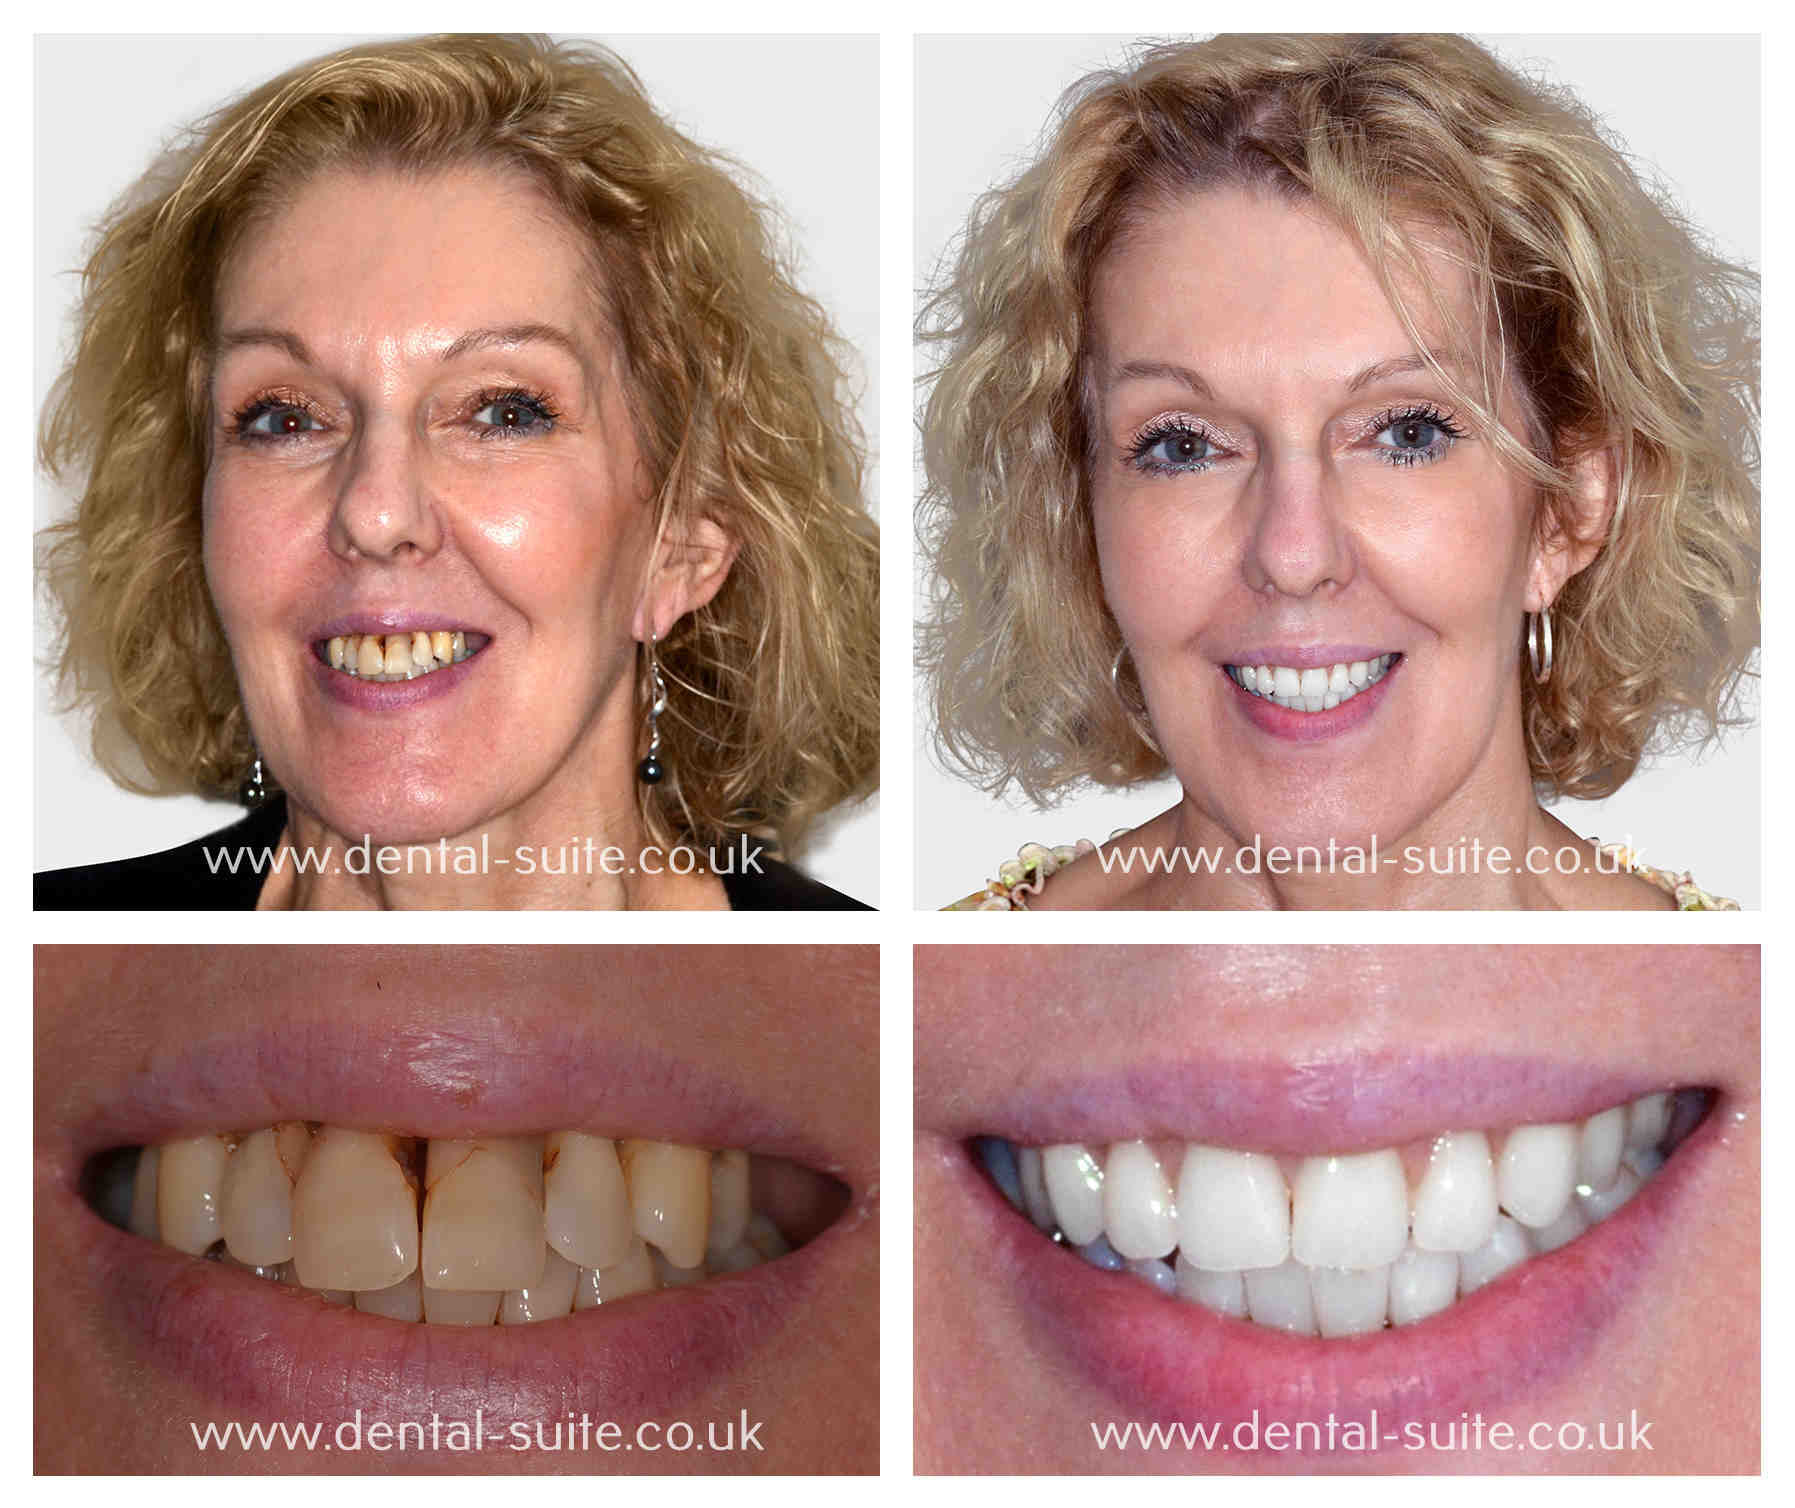 how-much-is-a-full-set-of-dental-implants-cost-dental-news-network